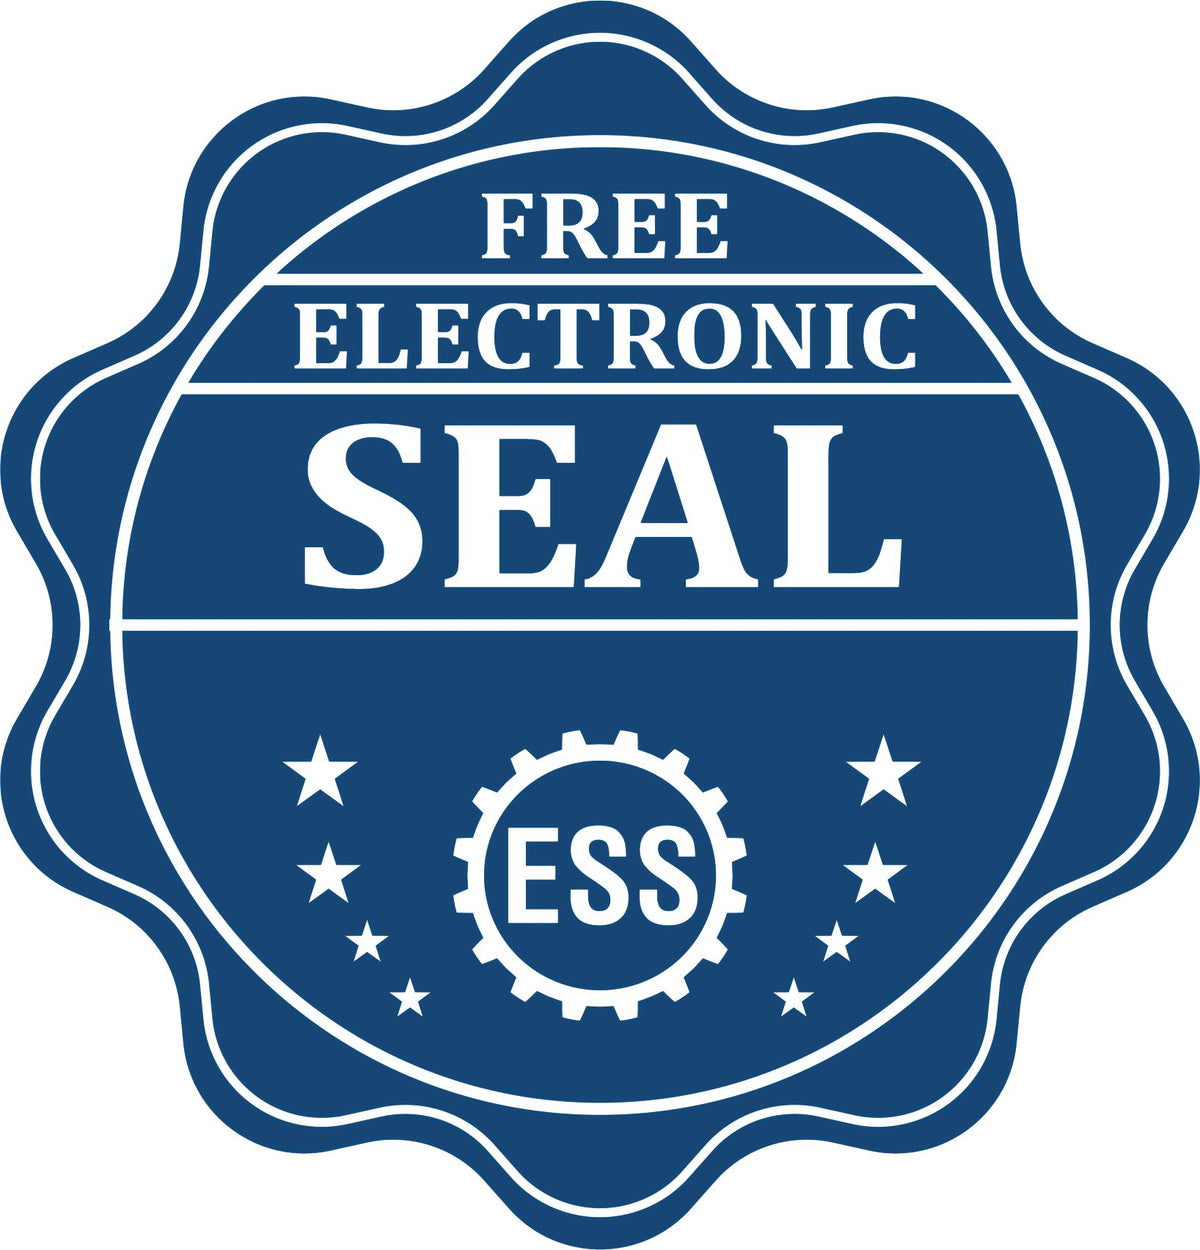 A badge showing a free electronic seal for the State of Pennsylvania Long Reach Architectural Embossing Seal with stars and the ESS gear on the emblem.